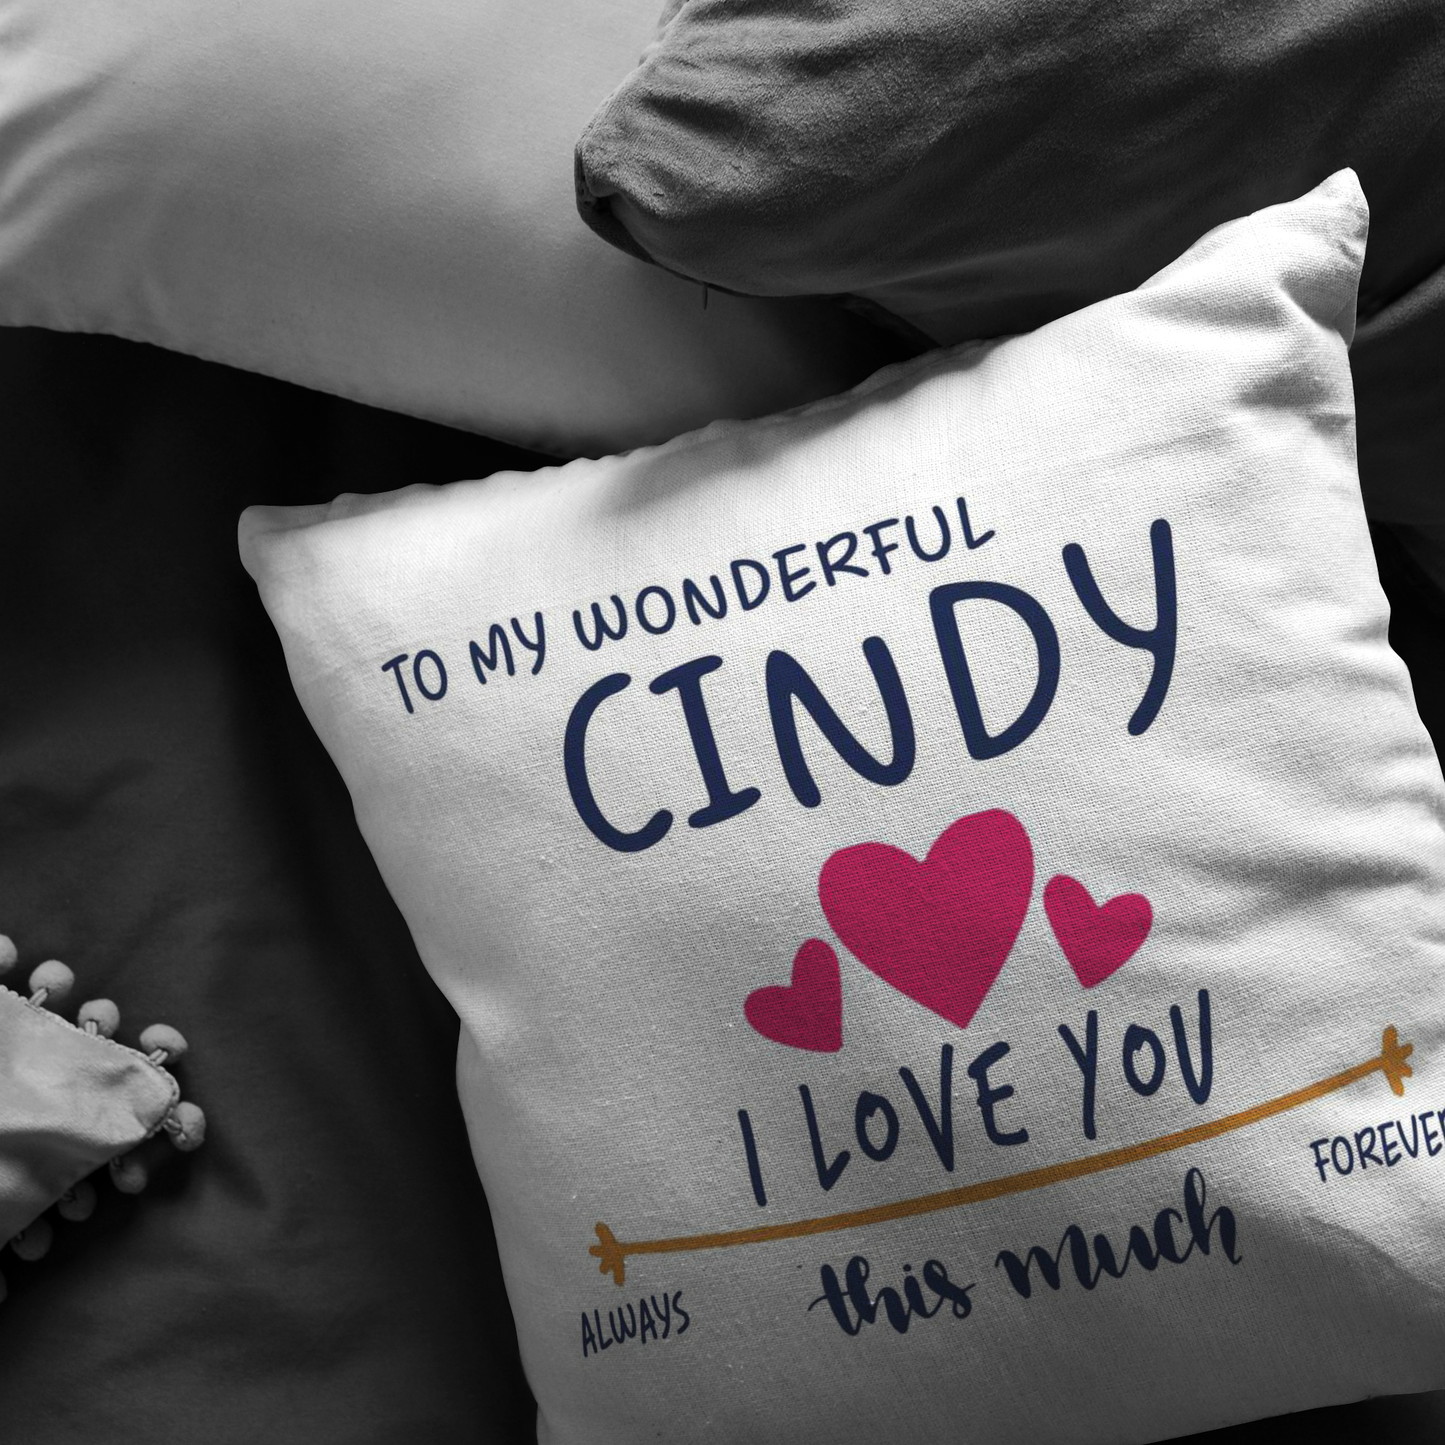 PL-21250723-sp-27489 - [ Cindy | 1 | 1 ] (PI_ThrowPillowCovers) Valentines Day Pillow Covers 18x18 - to My Wonderful Cindy I